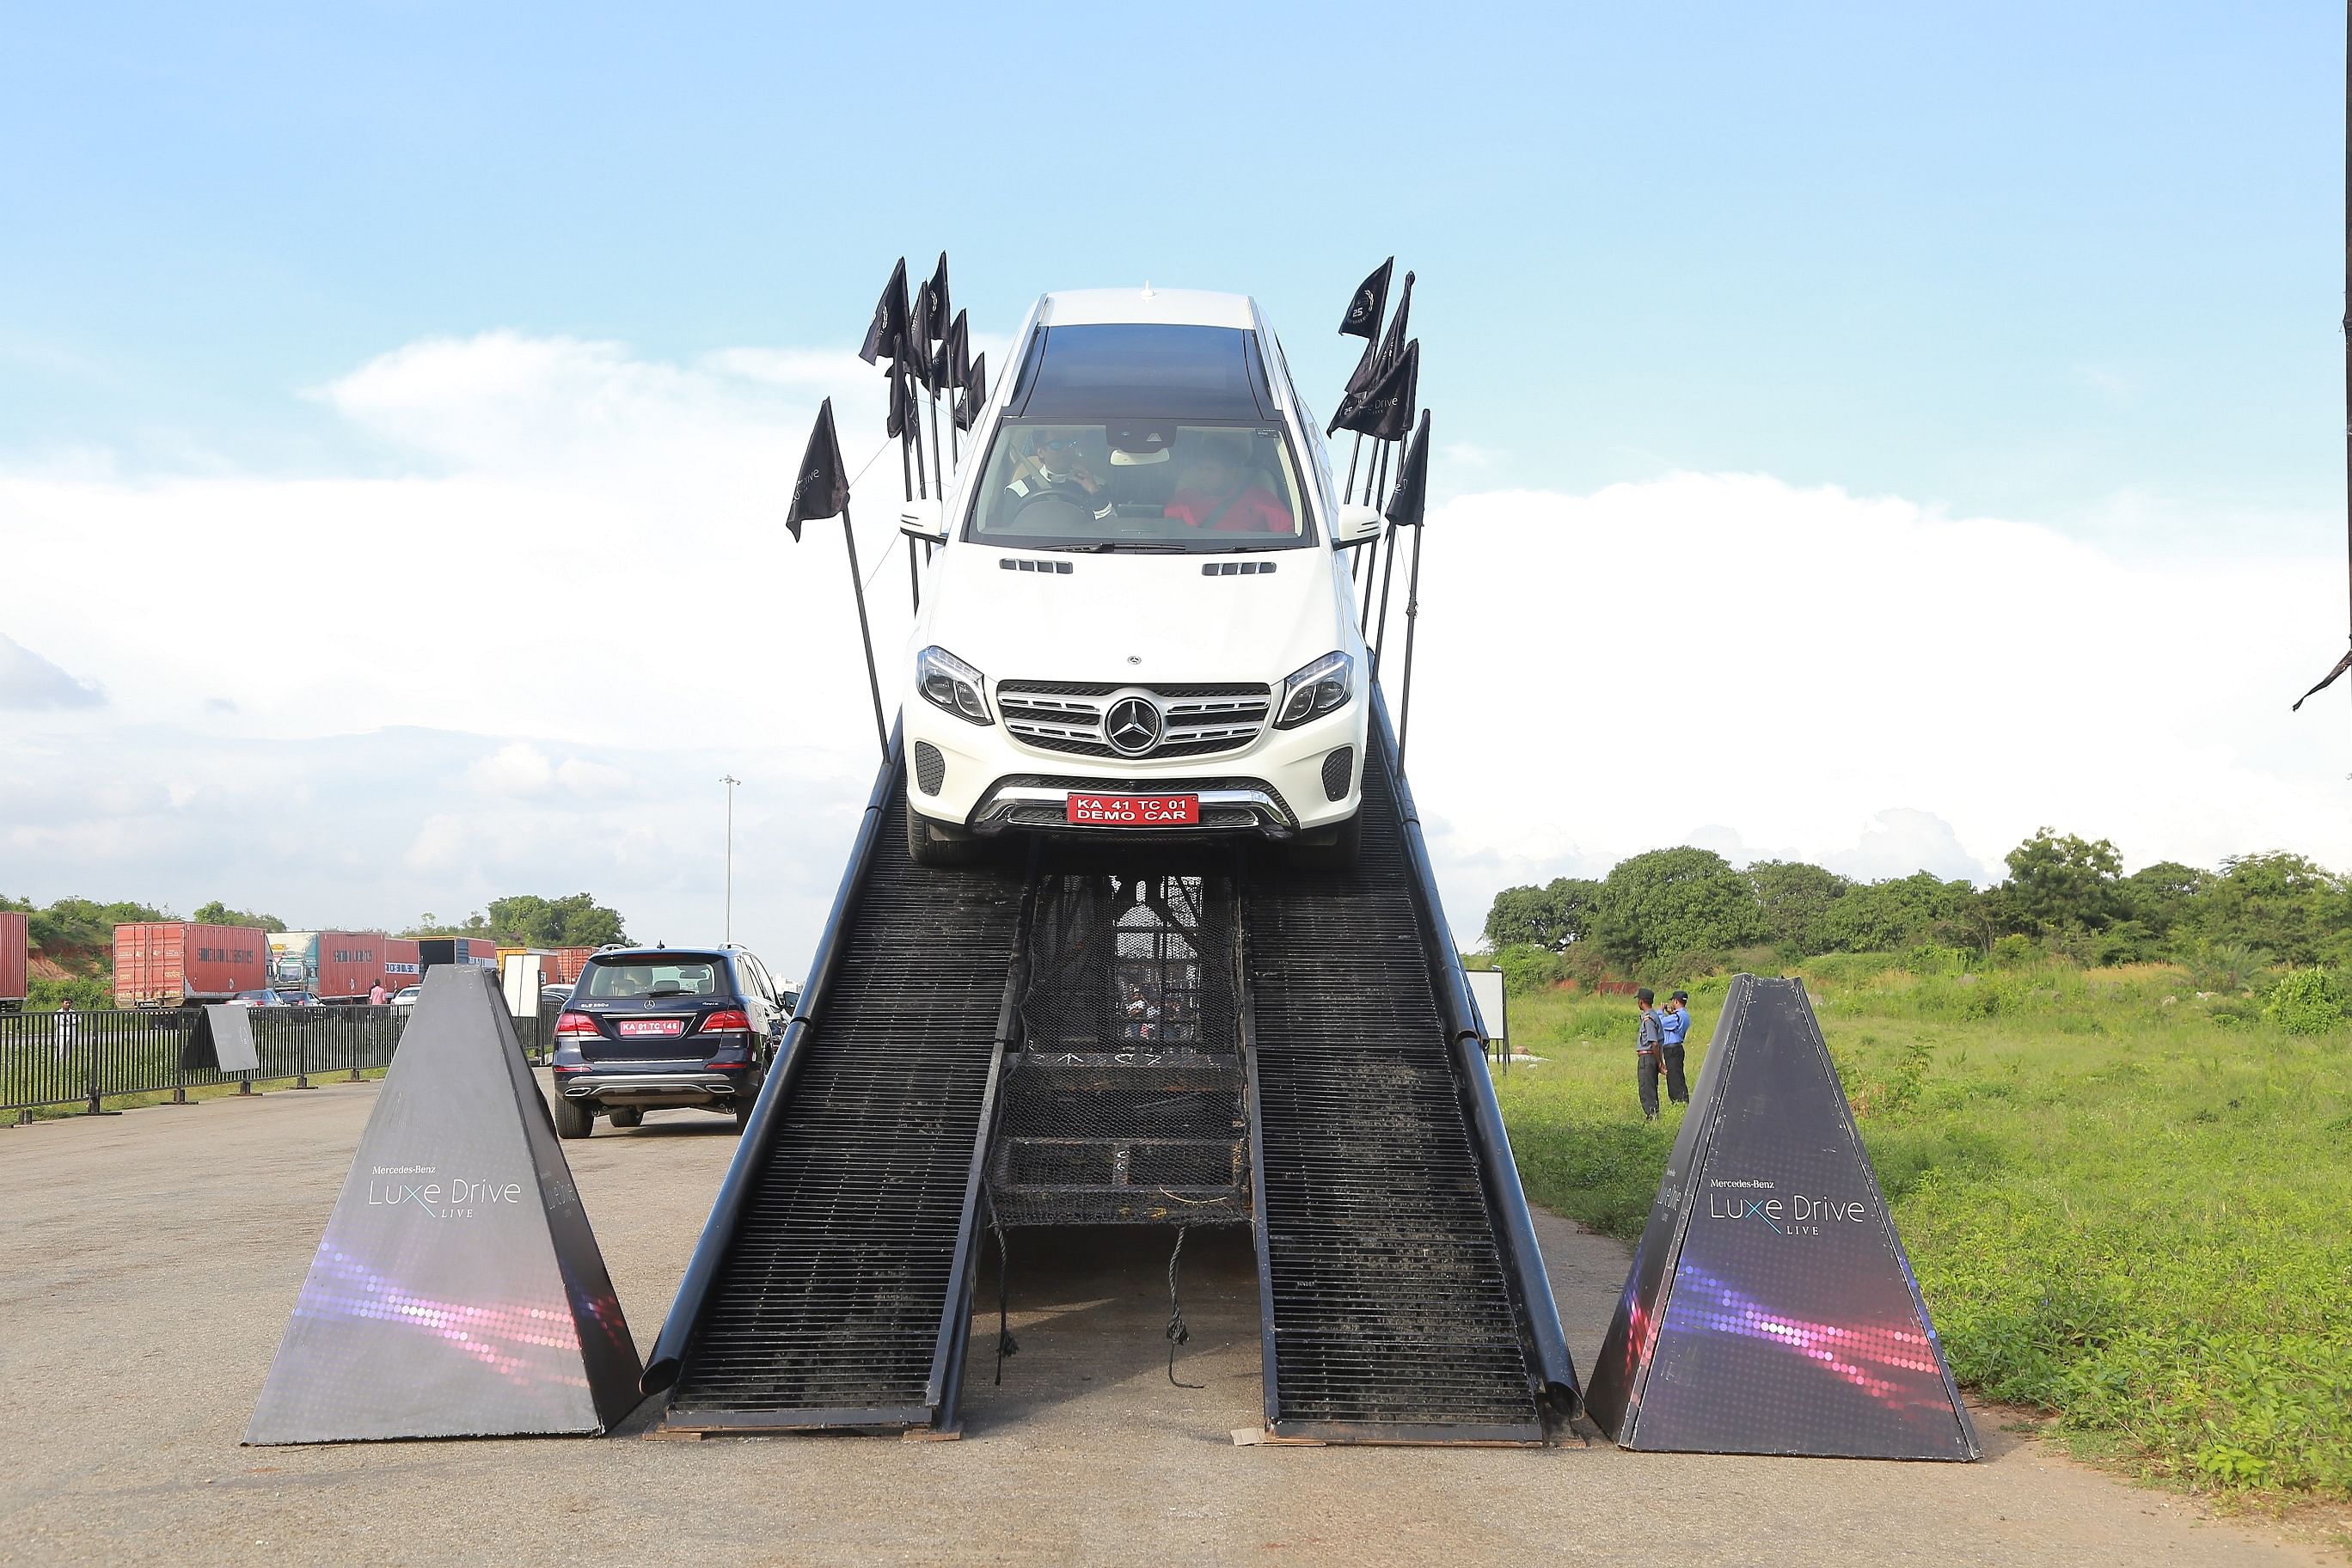 Participants were allowed to experience the off-road capabilities of Benz SUVs, by being driven through makeshift obstacles that simulate situations in the real world.